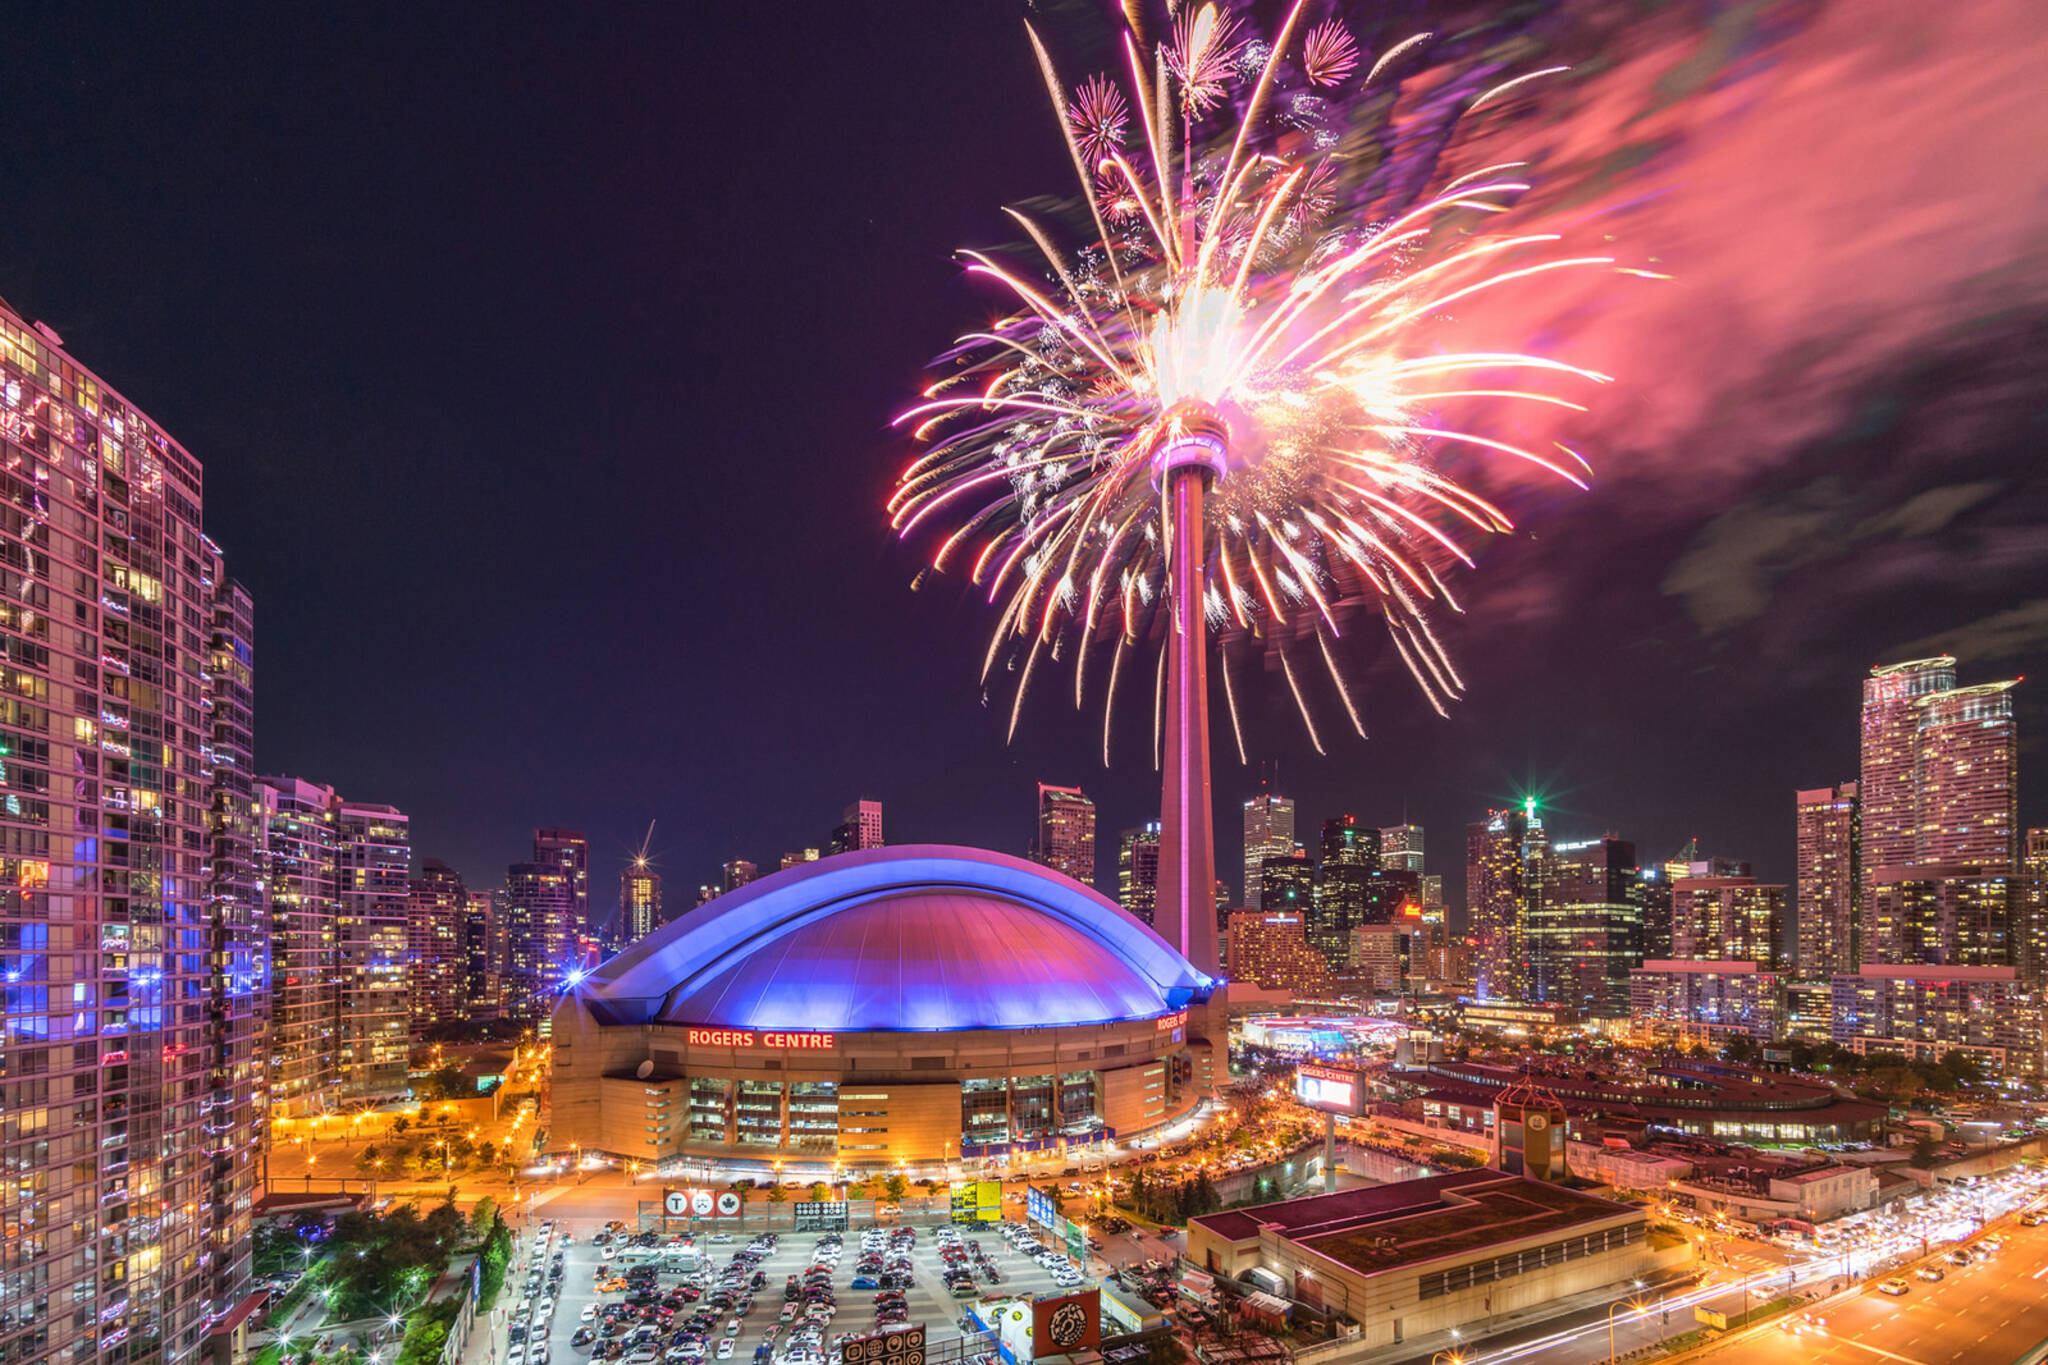 19 explosive photos of Canada Day fireworks in Toronto